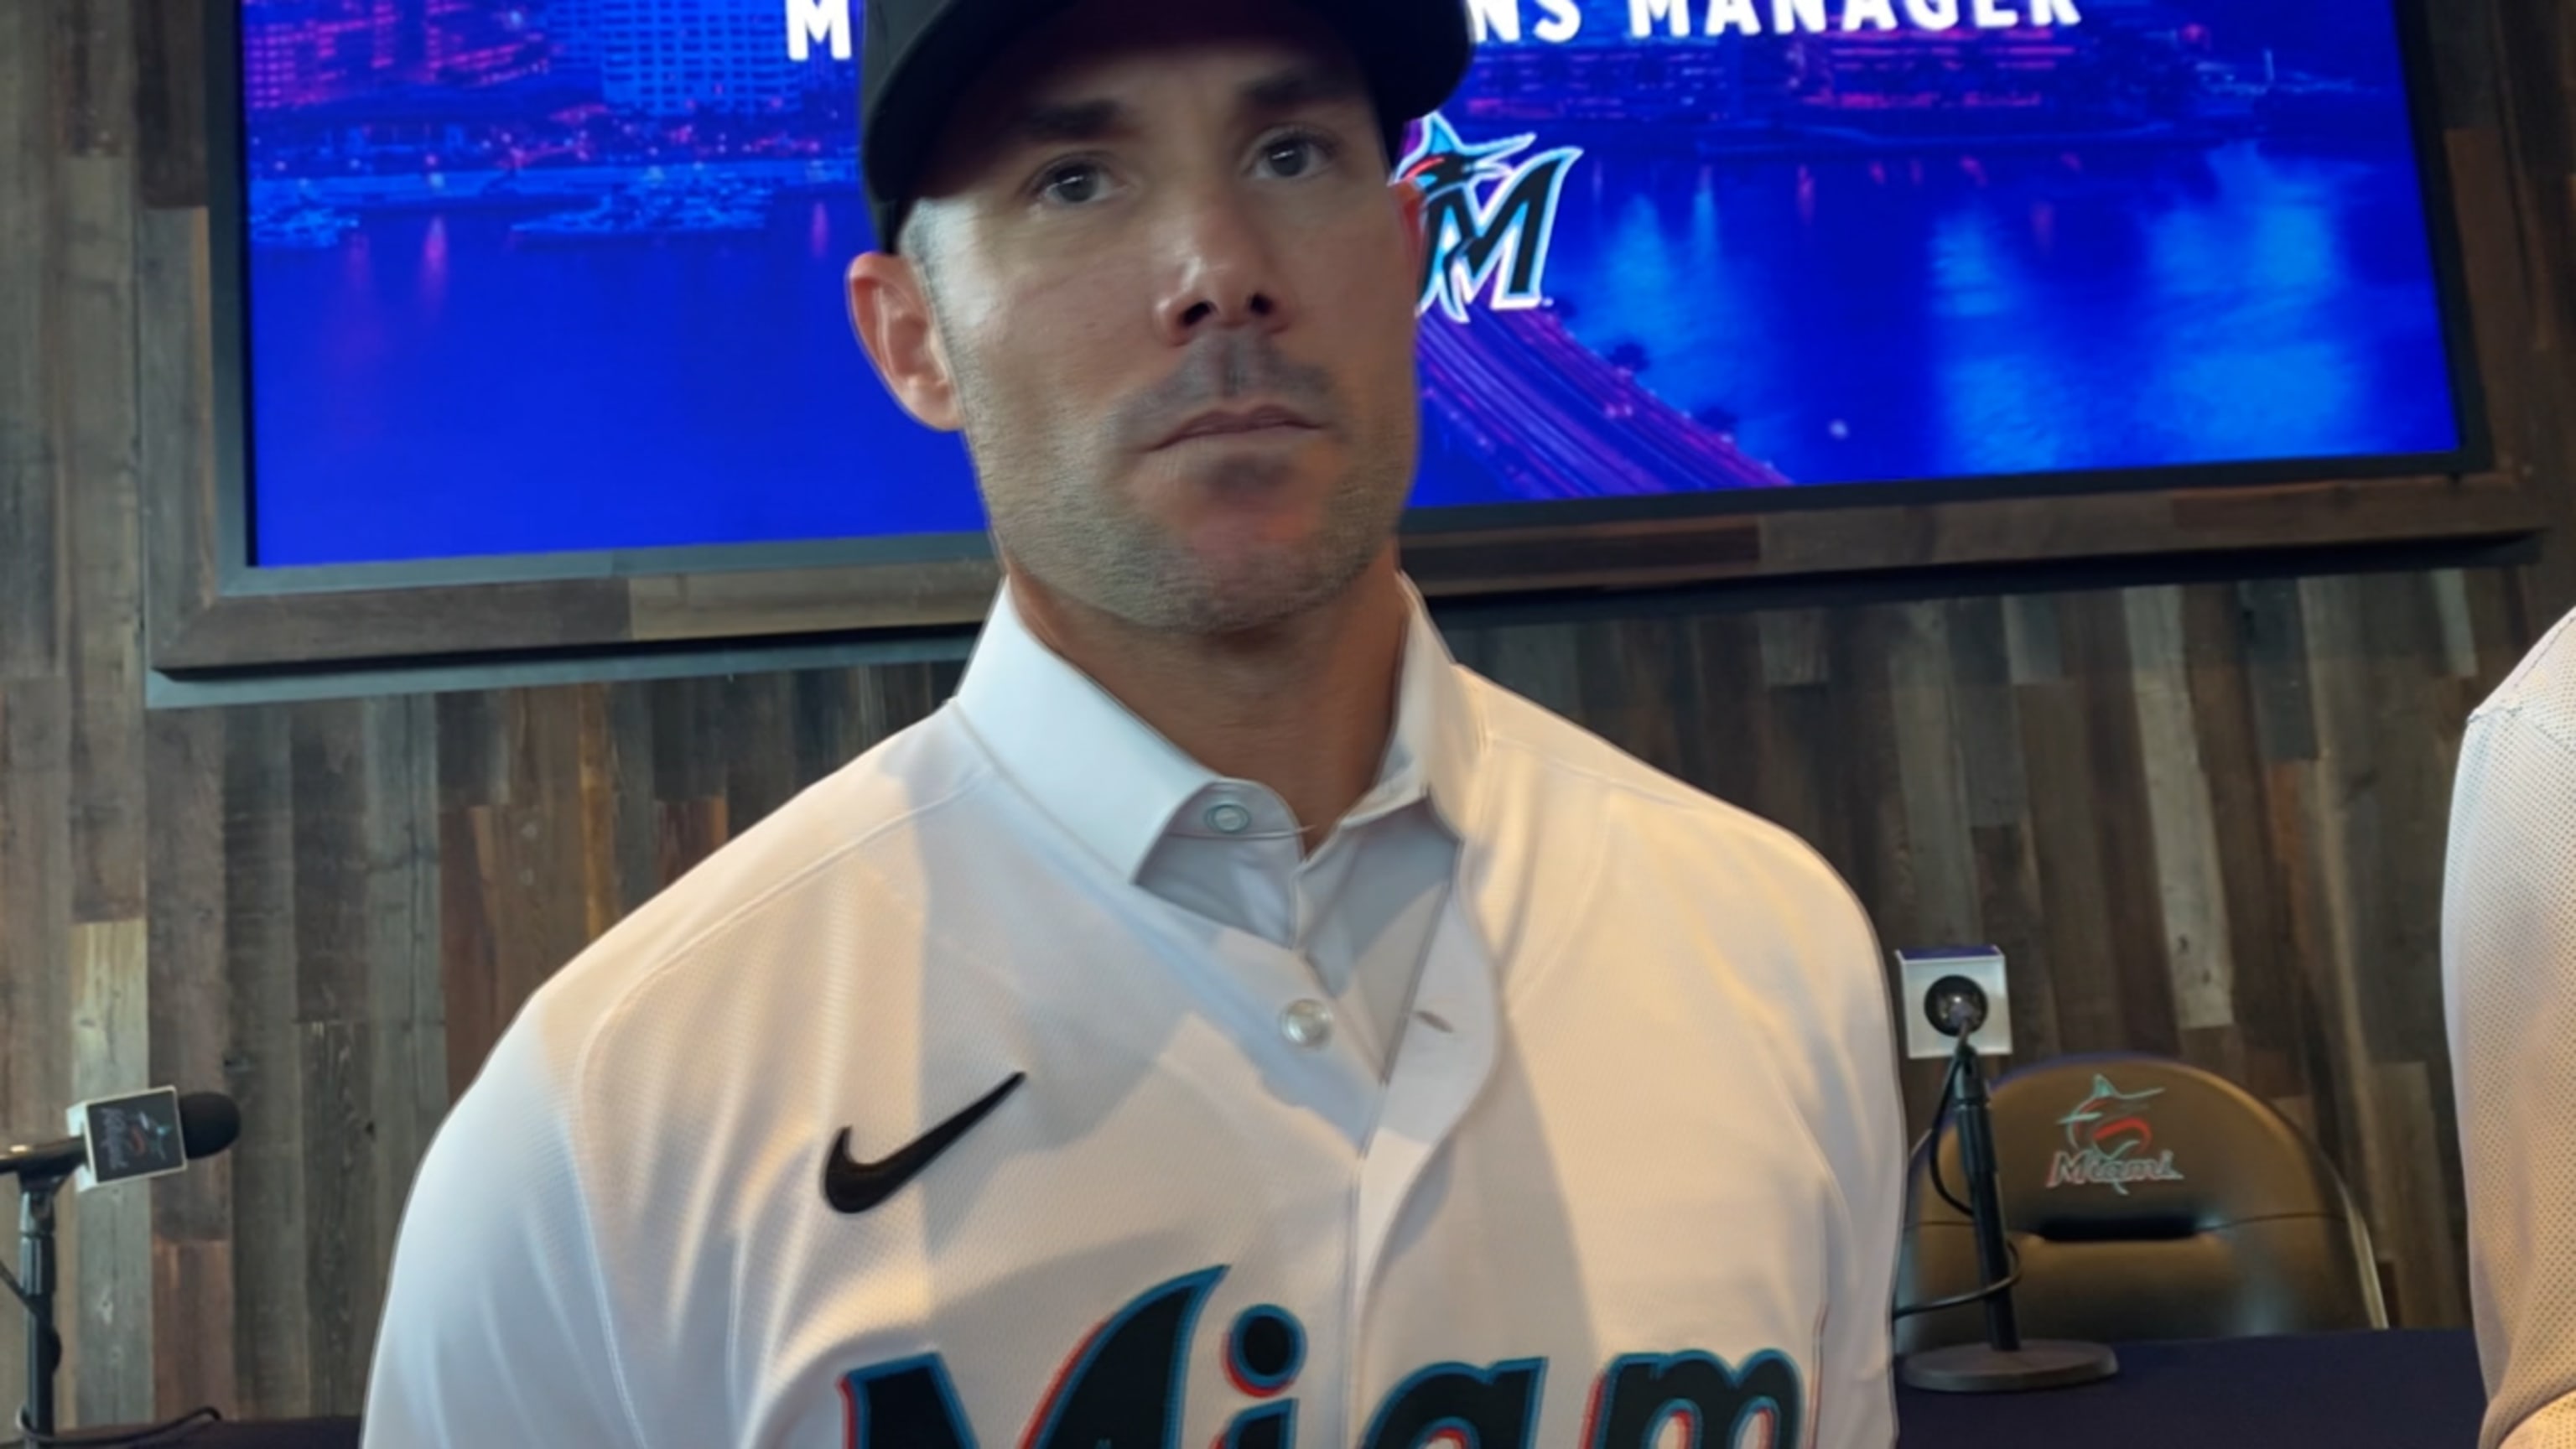 Miami Marlins Officially Introduce Skip Schumaker as Team's New Manager –  NBC 6 South Florida